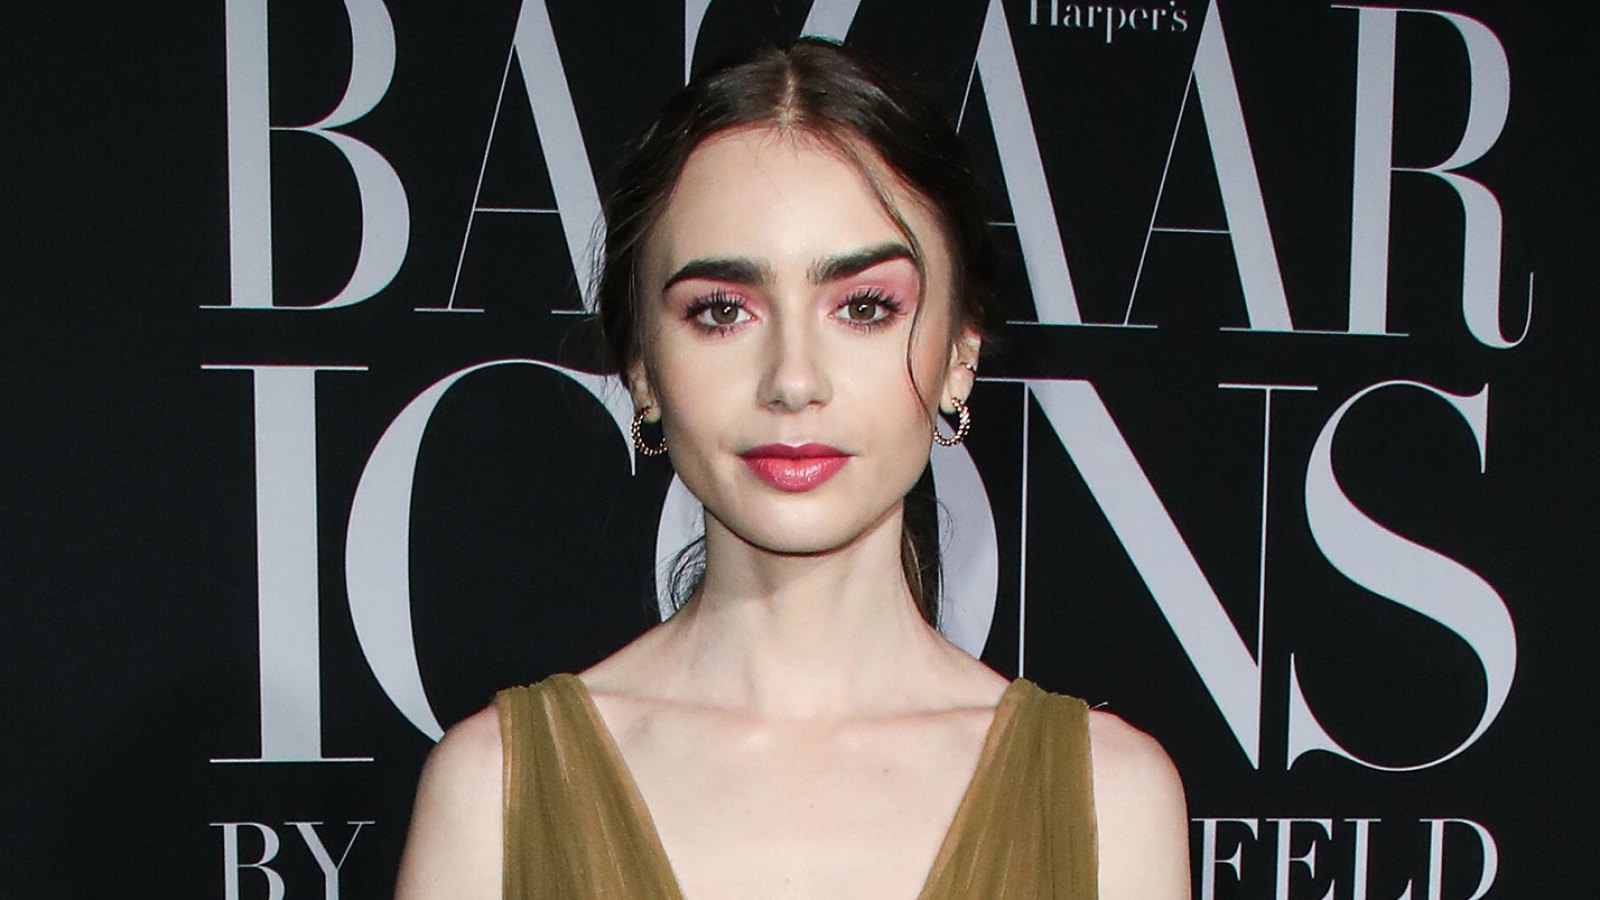 Lily Collins Wears Cutout Dress at 'Emily in Paris' Premiere - Parade